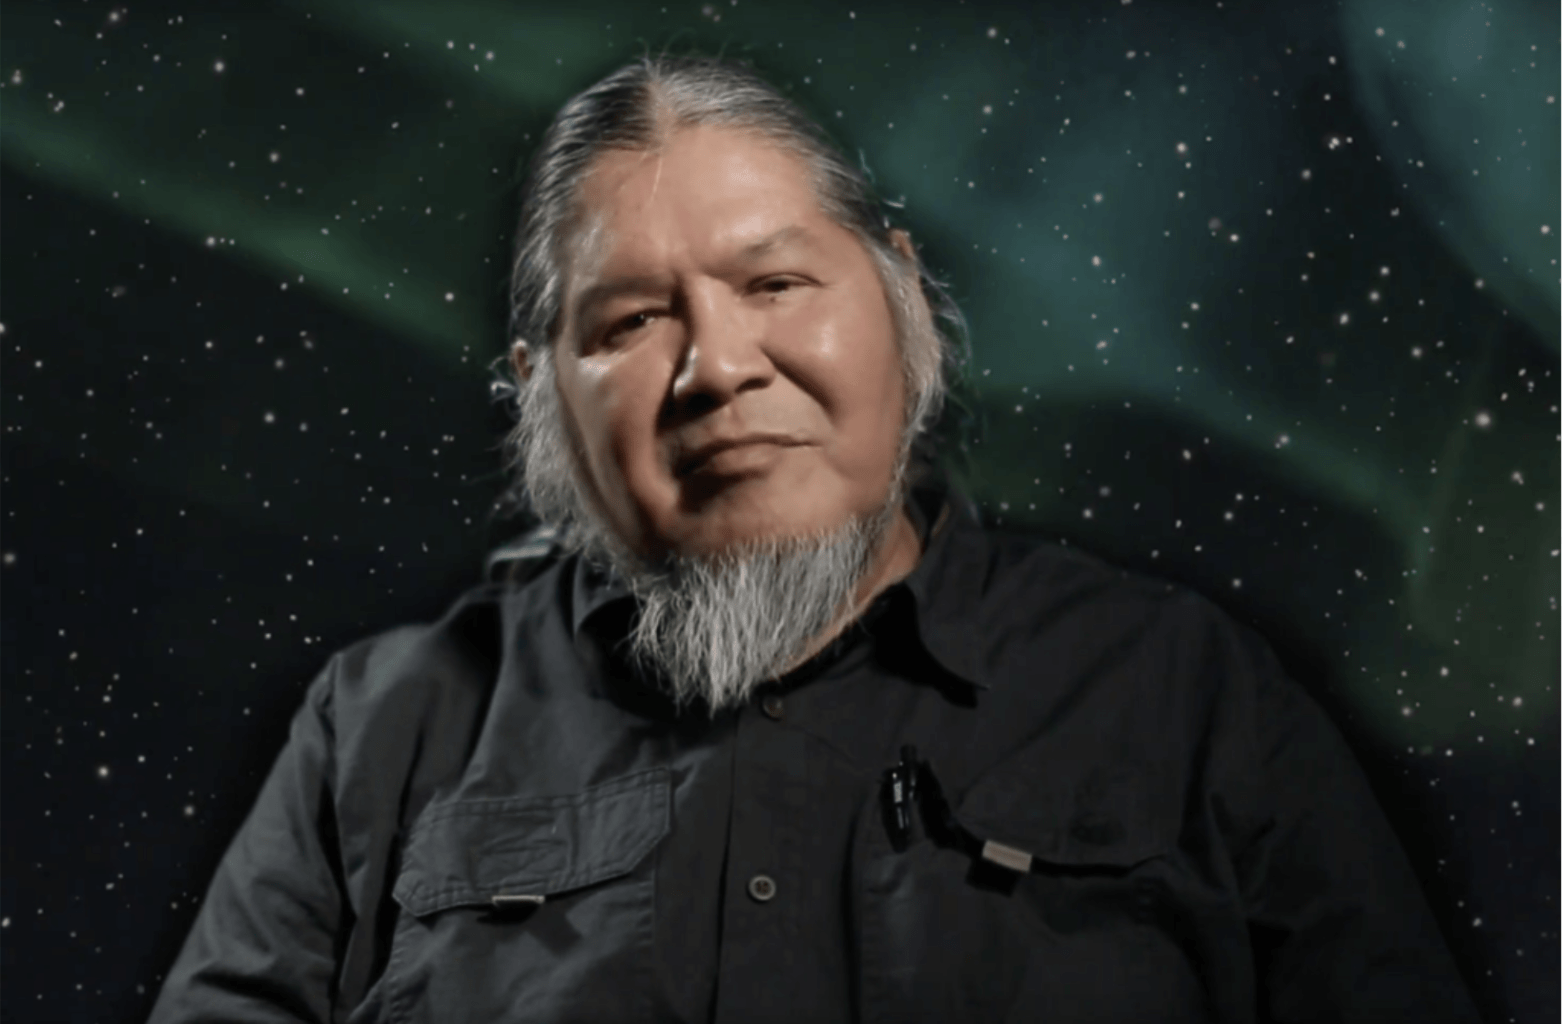 Wilfred Buck, Cree knowledge keeper and science educator